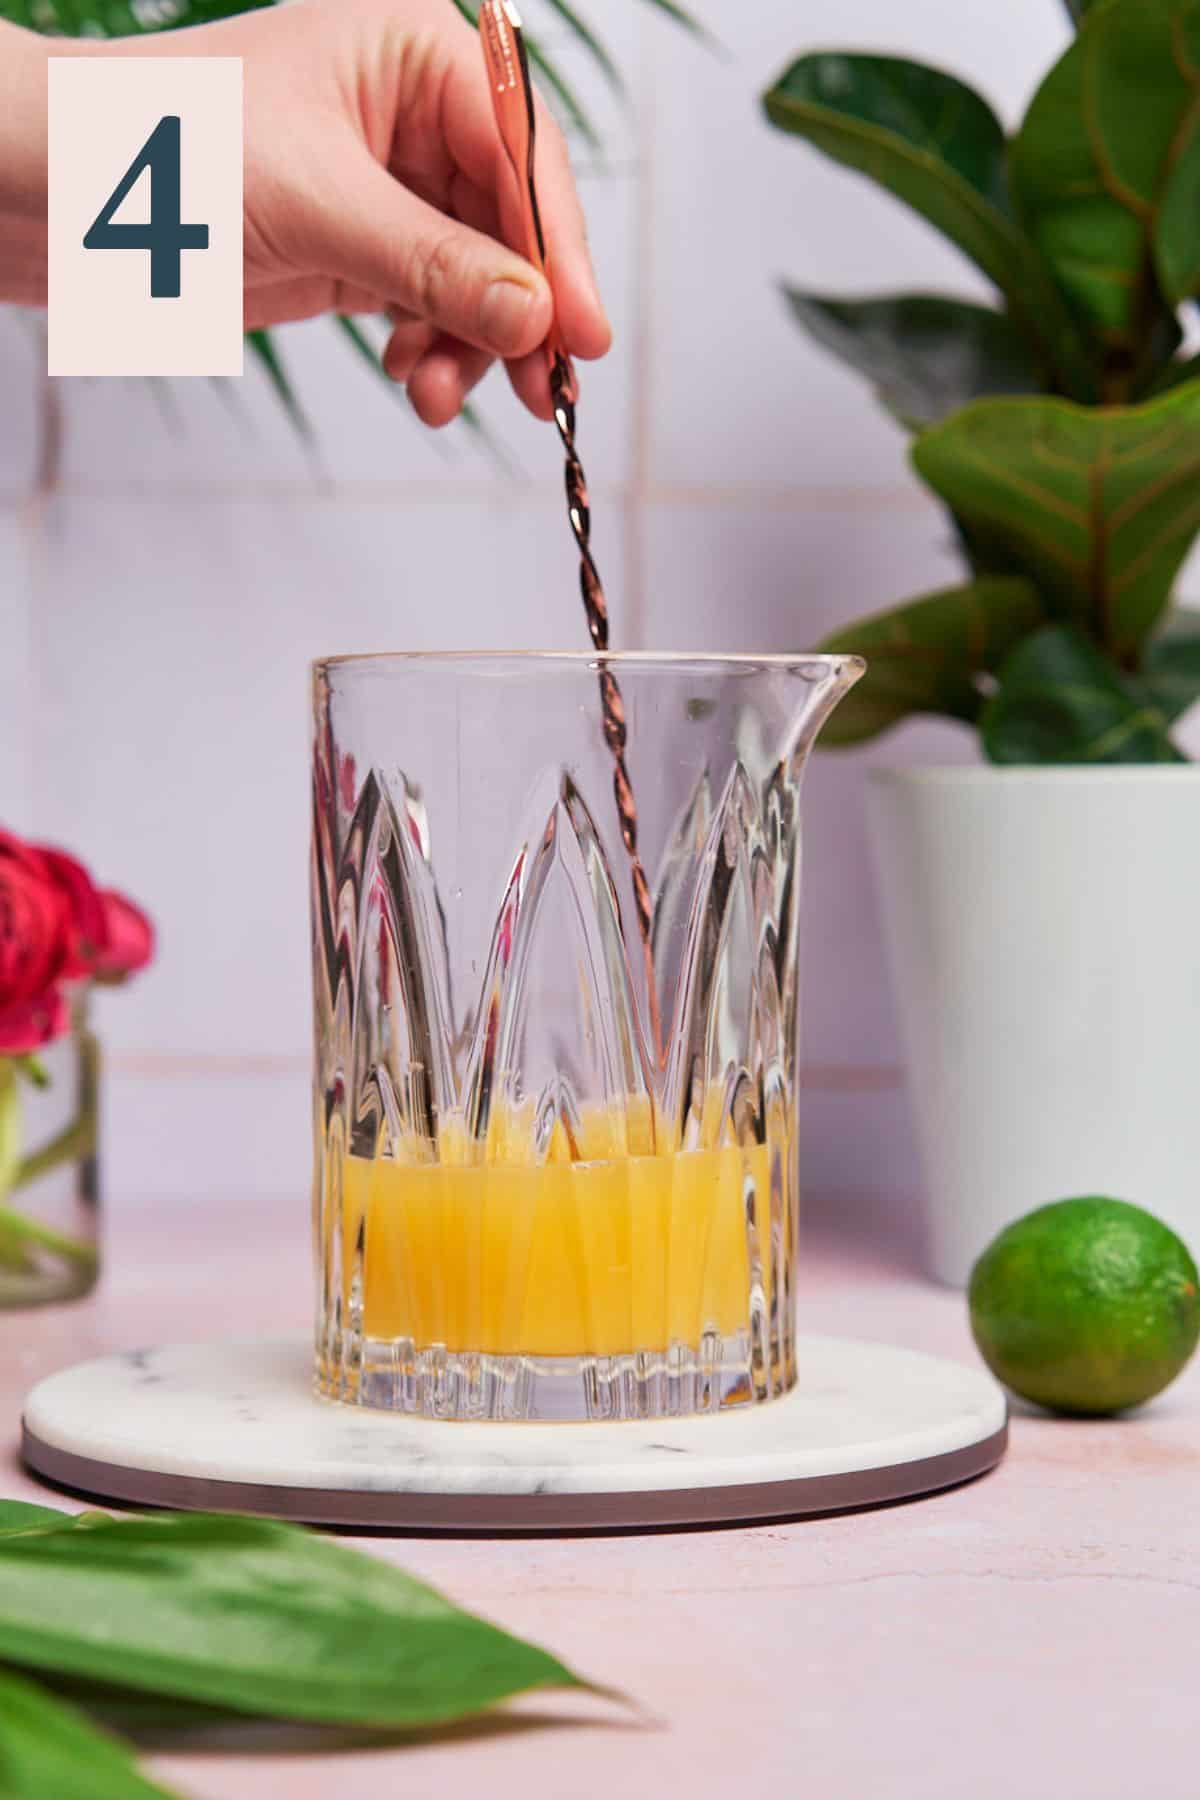 Pineapple mimosa mixture being stirred gently in a glass.